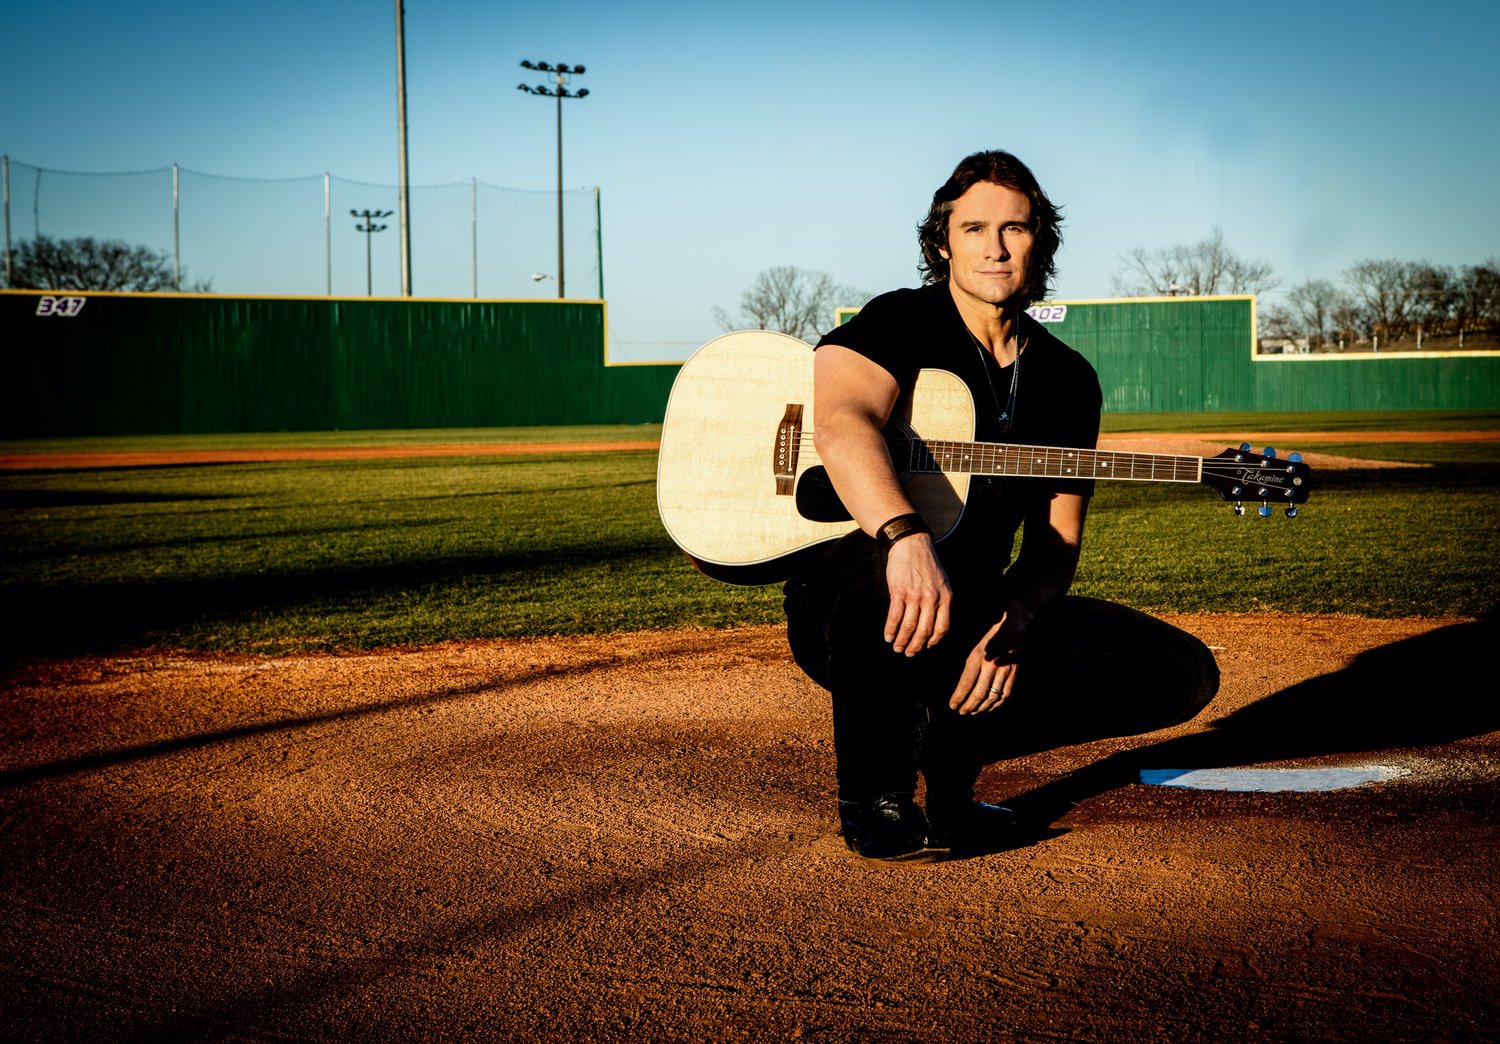 FALL FESTIVAL HEADLINER — Country star Joe Nichols will be the headliner at this year’s Warrenton Fall Festival scheduled for Sept. 23. Nichols is best known for “Brokenheartsville,” “Tequila Makes Her Clothes Fall Off” and “Sunny and 75.”